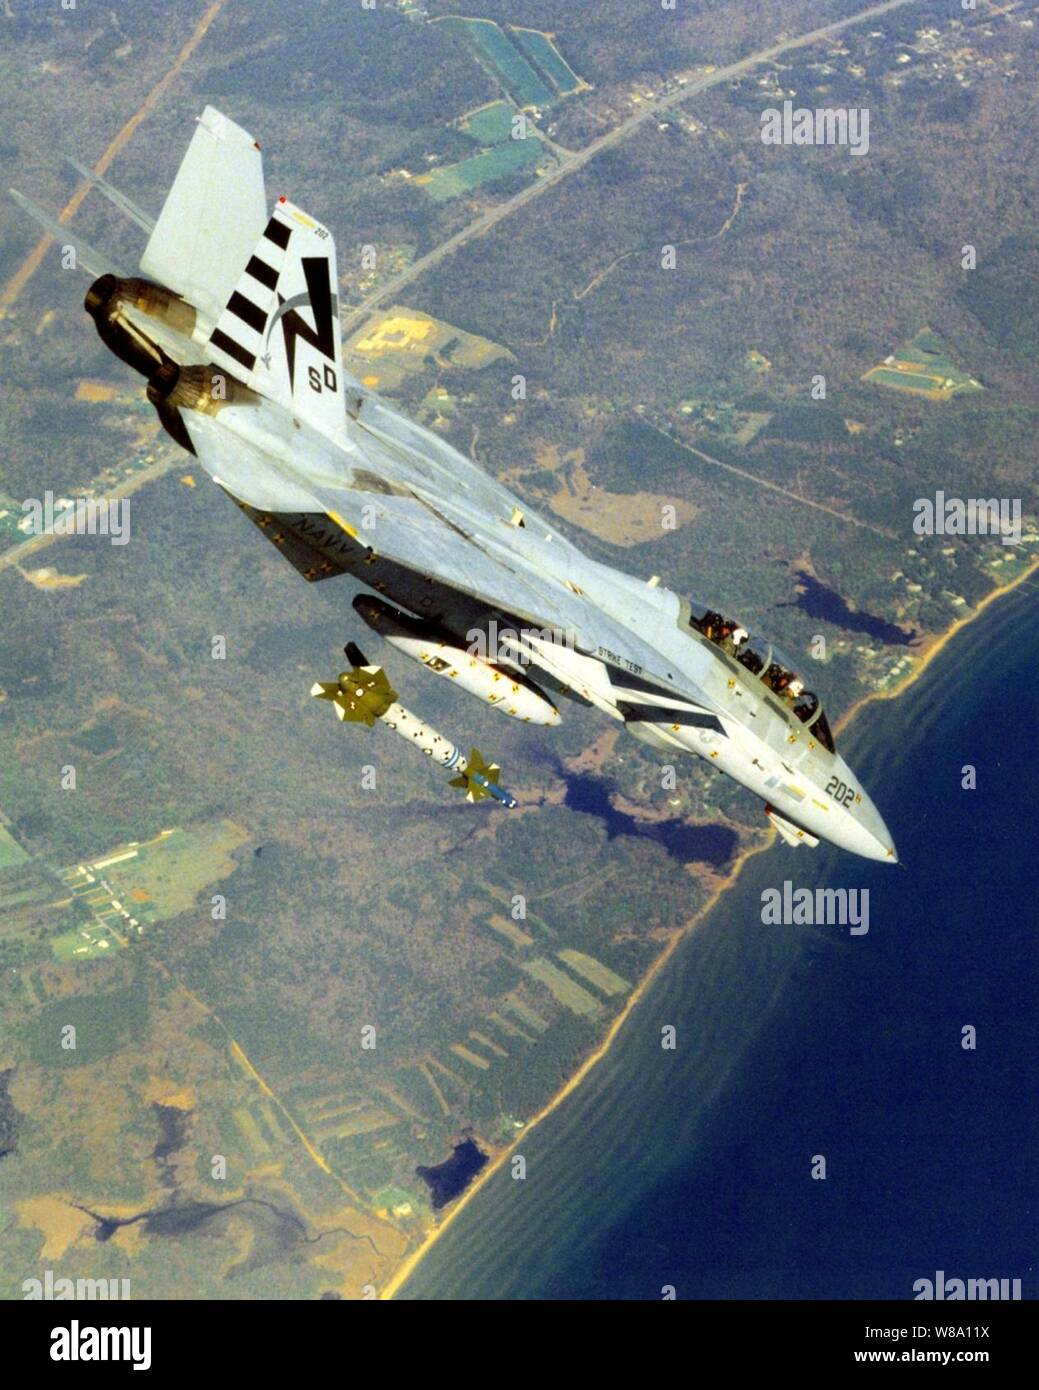 A U.S. Navy F-14A Tomcat releases a GBU-24B/B Hard Target Penetrator Laser-Guided Bomb while in a in a 45-degree dive during ordnance separation testing on May 10, 1996.  The Navy is conducting the tests at Naval Air Station Patuxent River, Md., as part of an air-to-ground development program to support clearance for use of the weapon in the fleet  by F-14 Tomcats.  This Tomcat is assigned to the Strike Aircraft Test Squadron at Patuxent River. Stock Photo